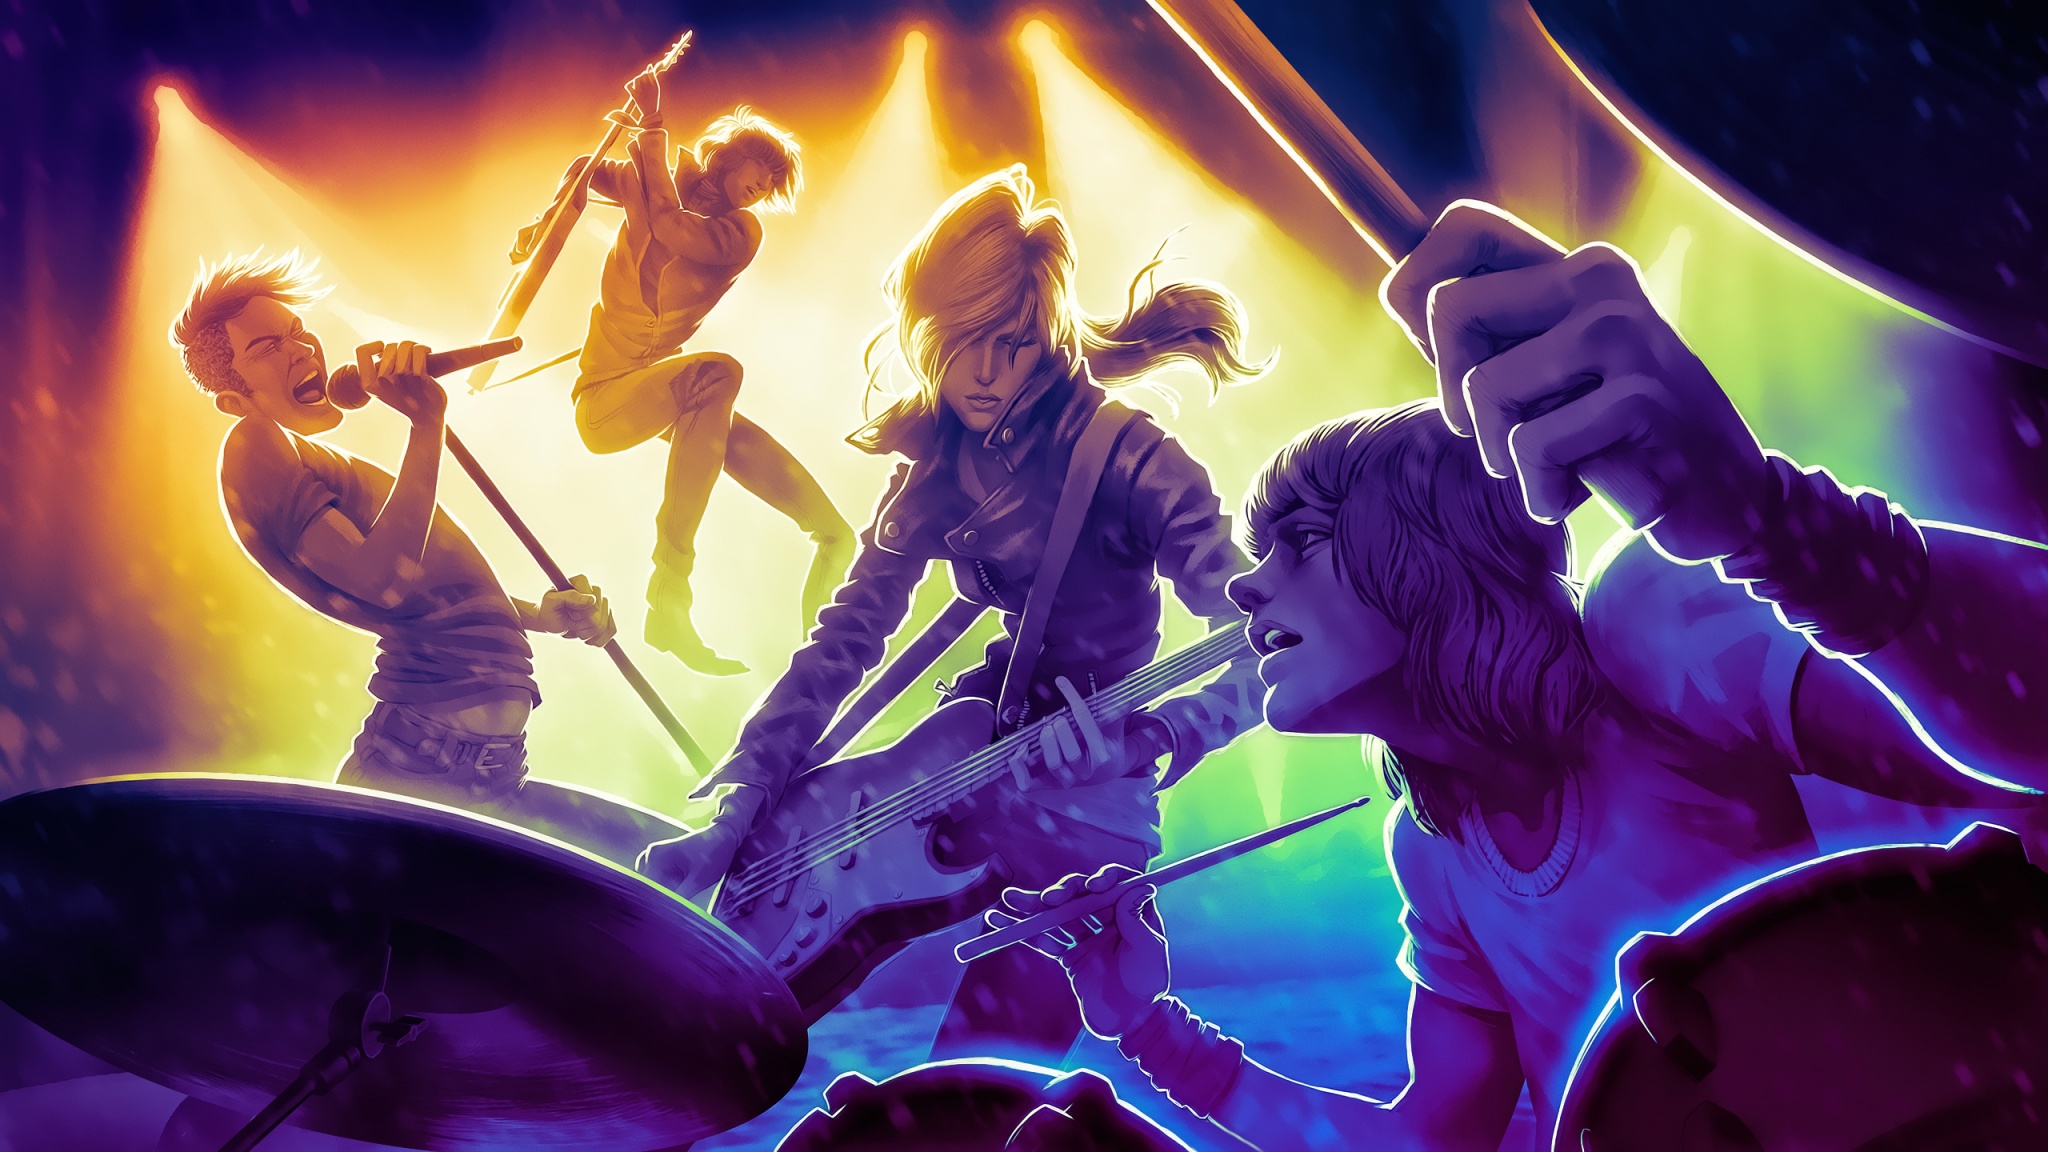 Rock Band 4 2015 Wallpapers   2048x1152   632372